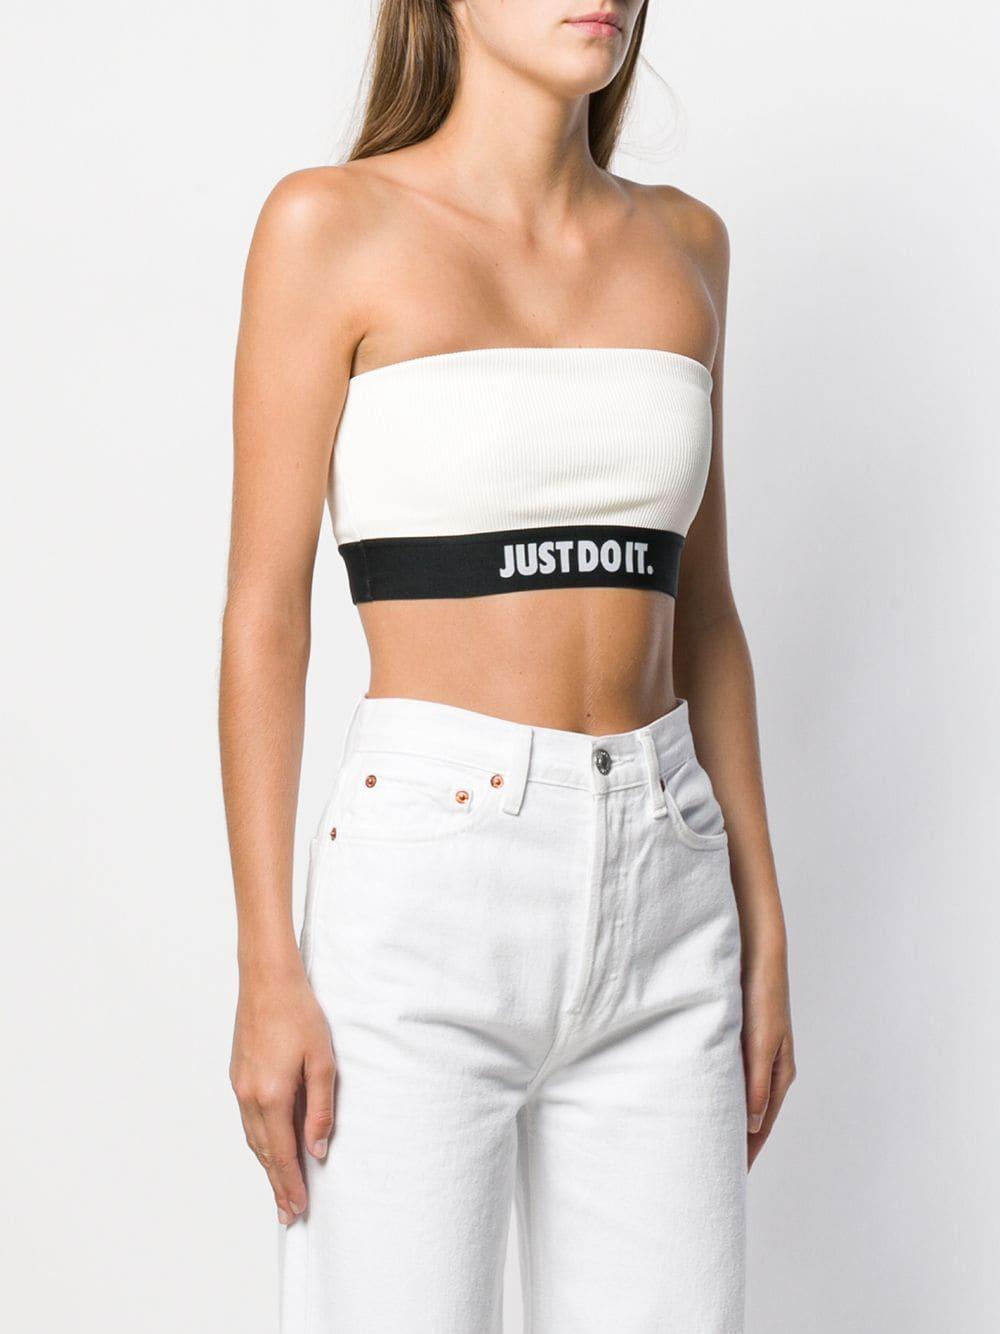 nike strapless top